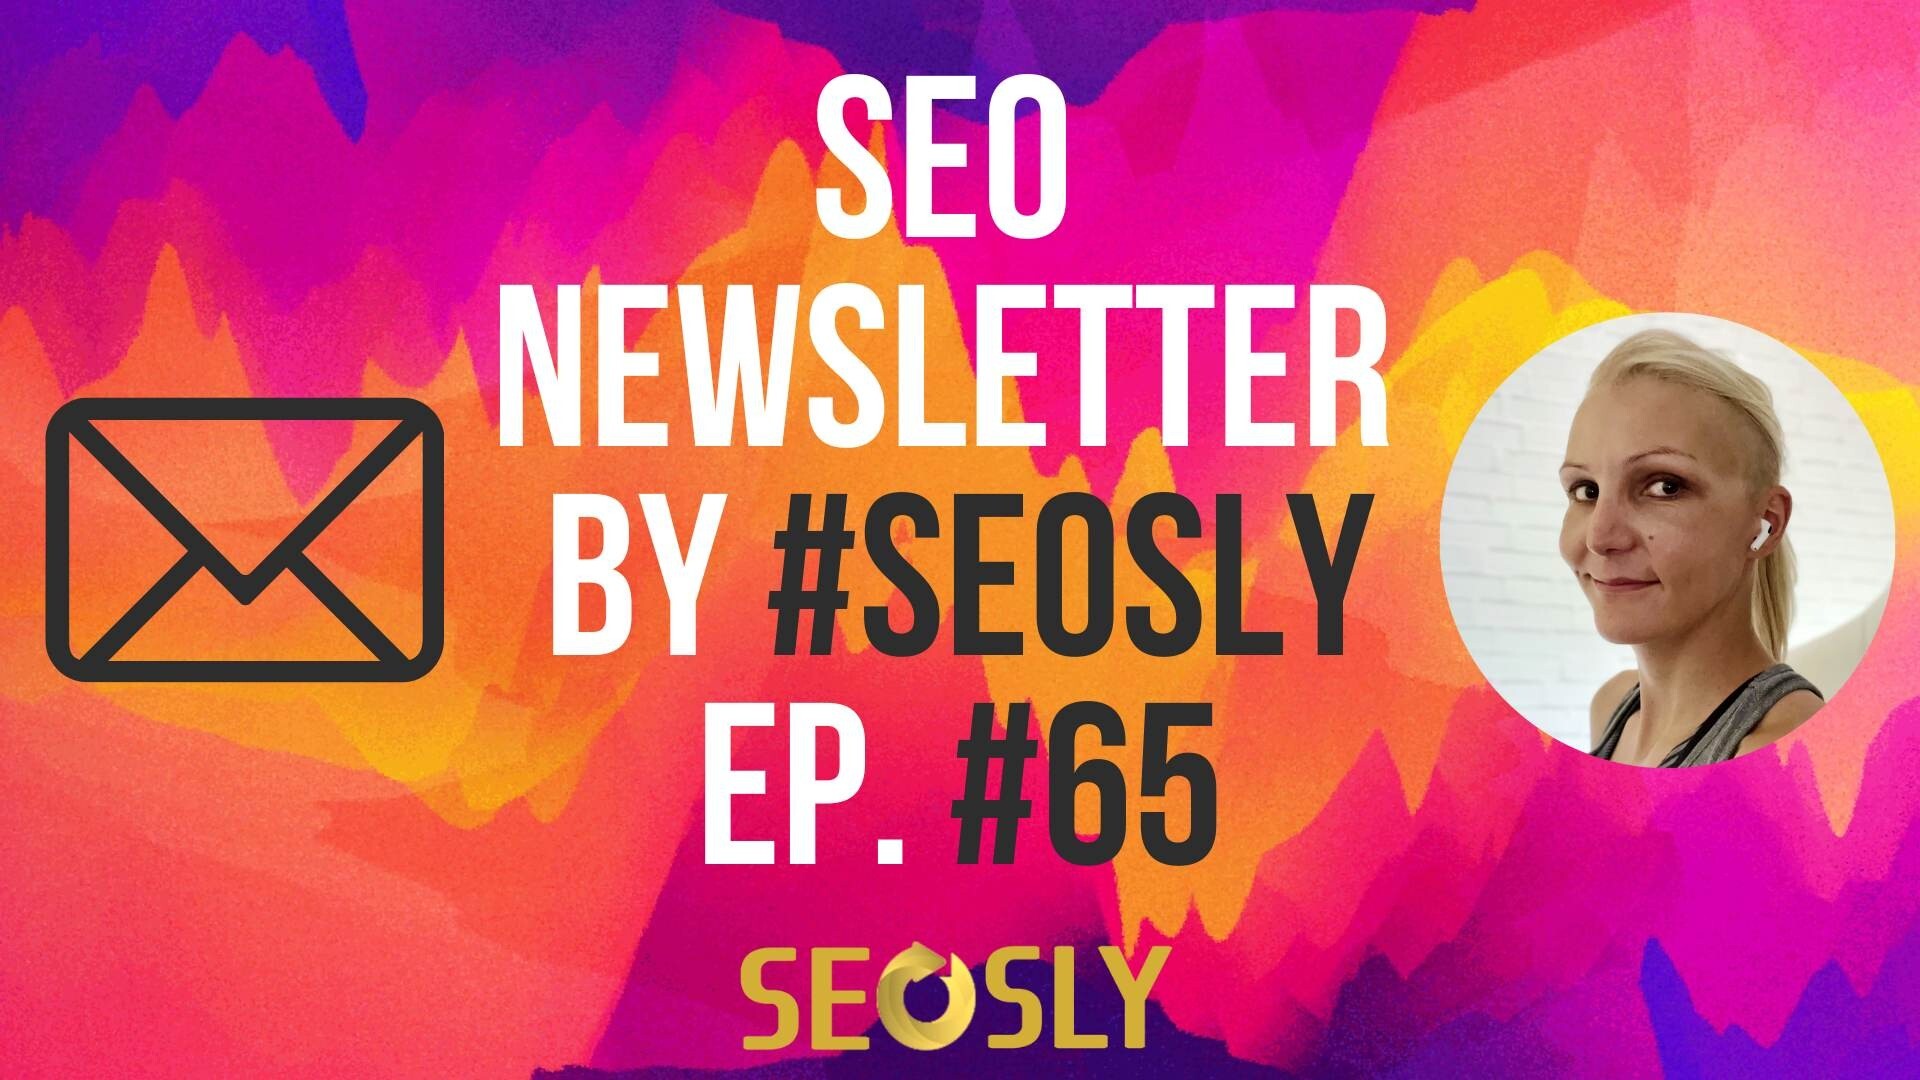 ChatGPT For SEO - SEOSLY